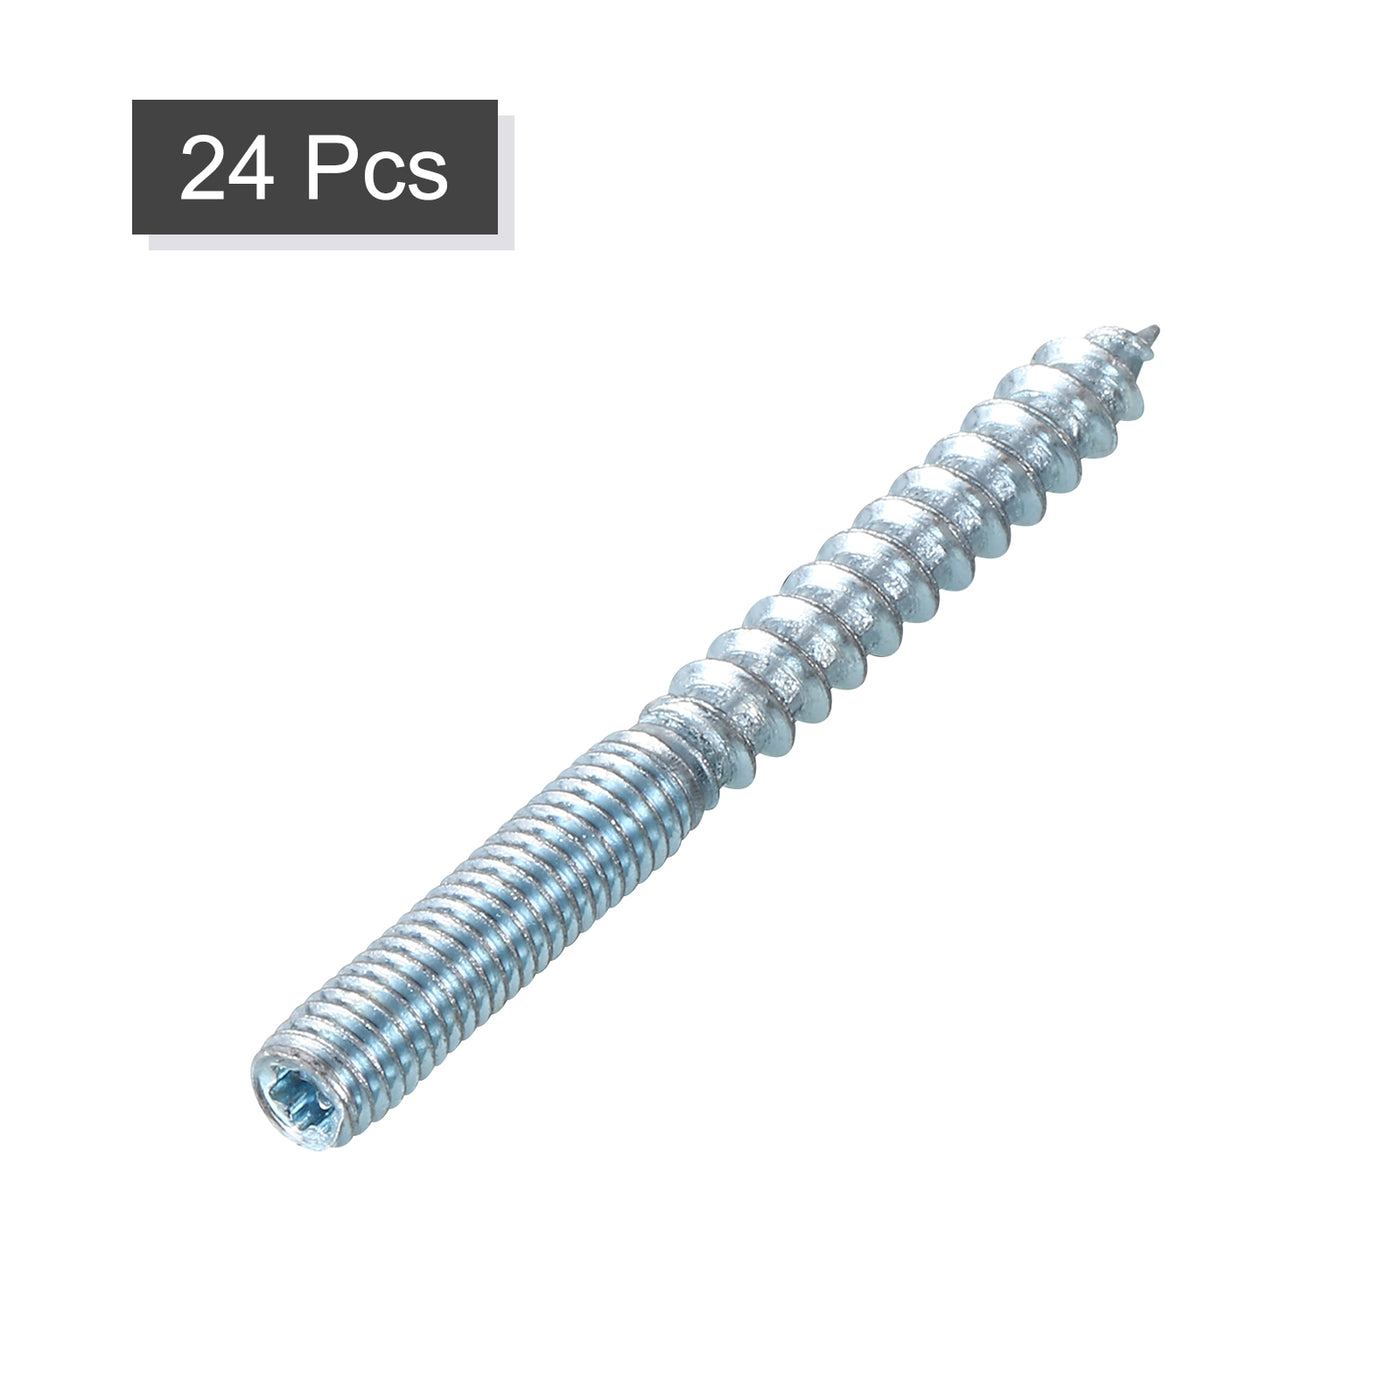 uxcell Uxcell 24Pcs M6x60mm Hanger Bolt Double Headed Bolt Self-Tapping Screw for Furniture